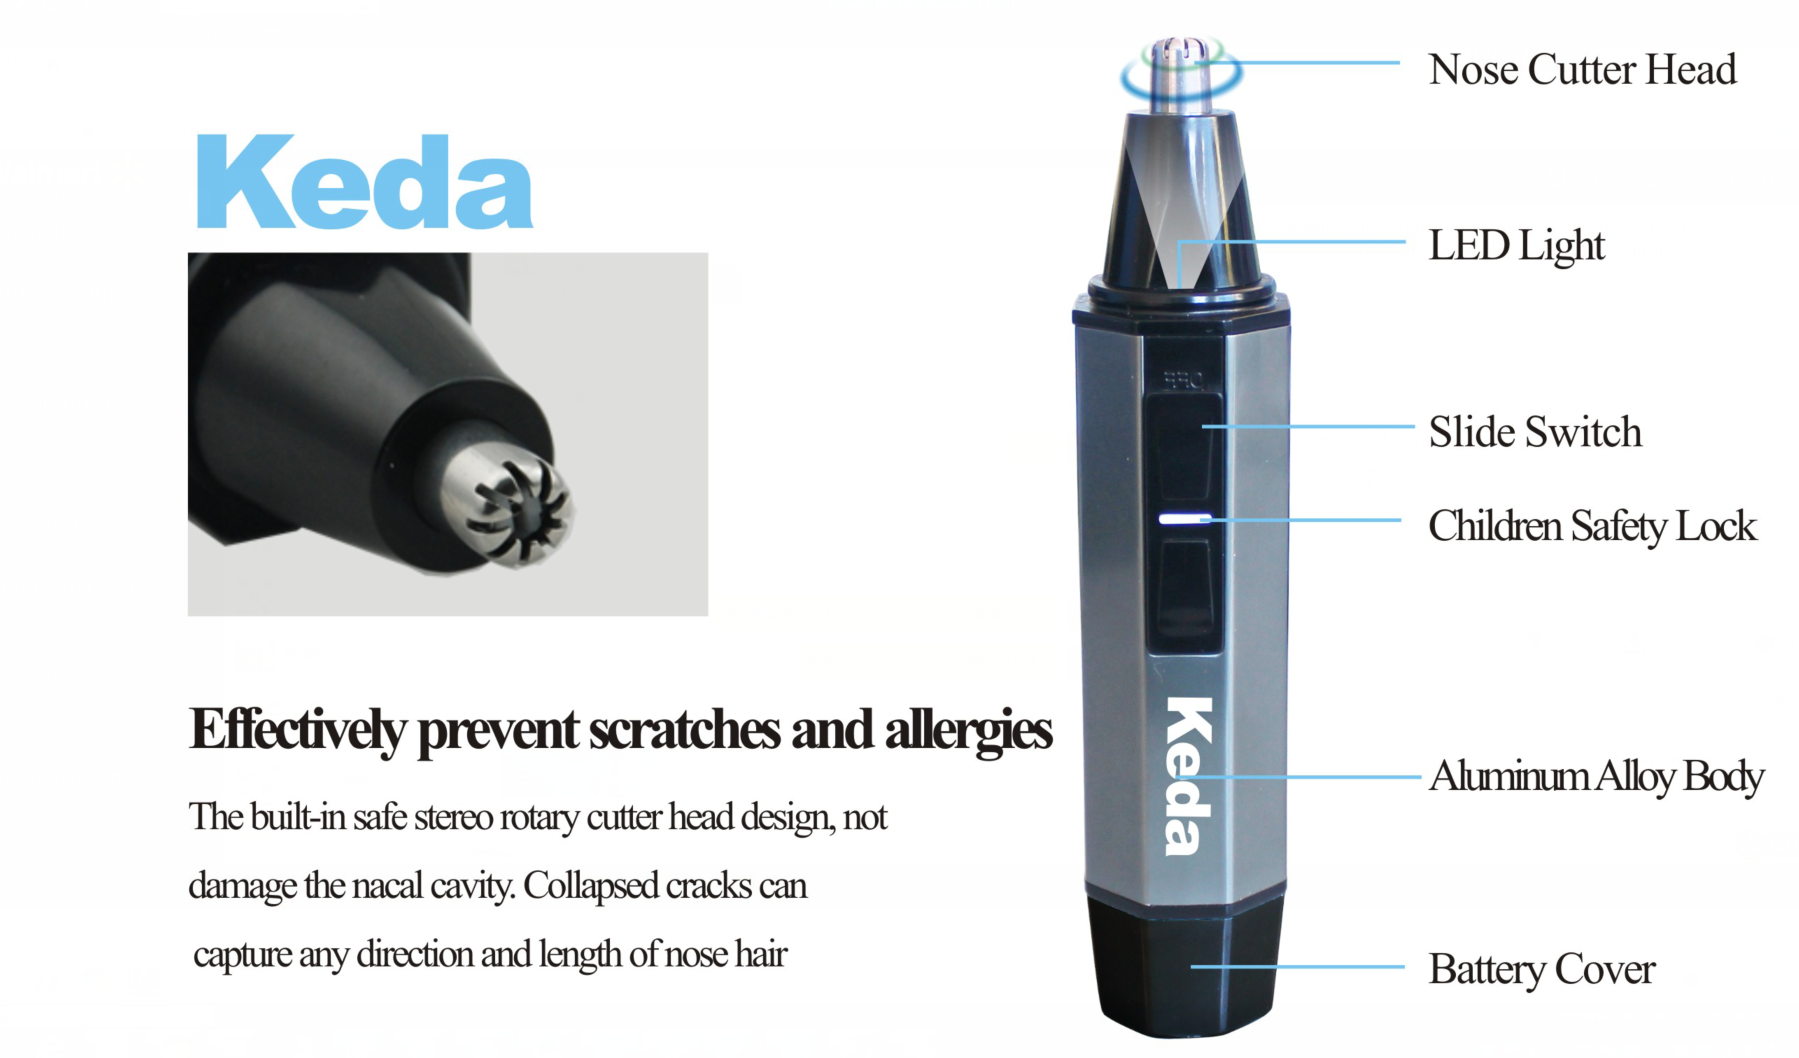 Water Resistant Stainless Steel Nose and Ear Hair Trimmer with LED Light